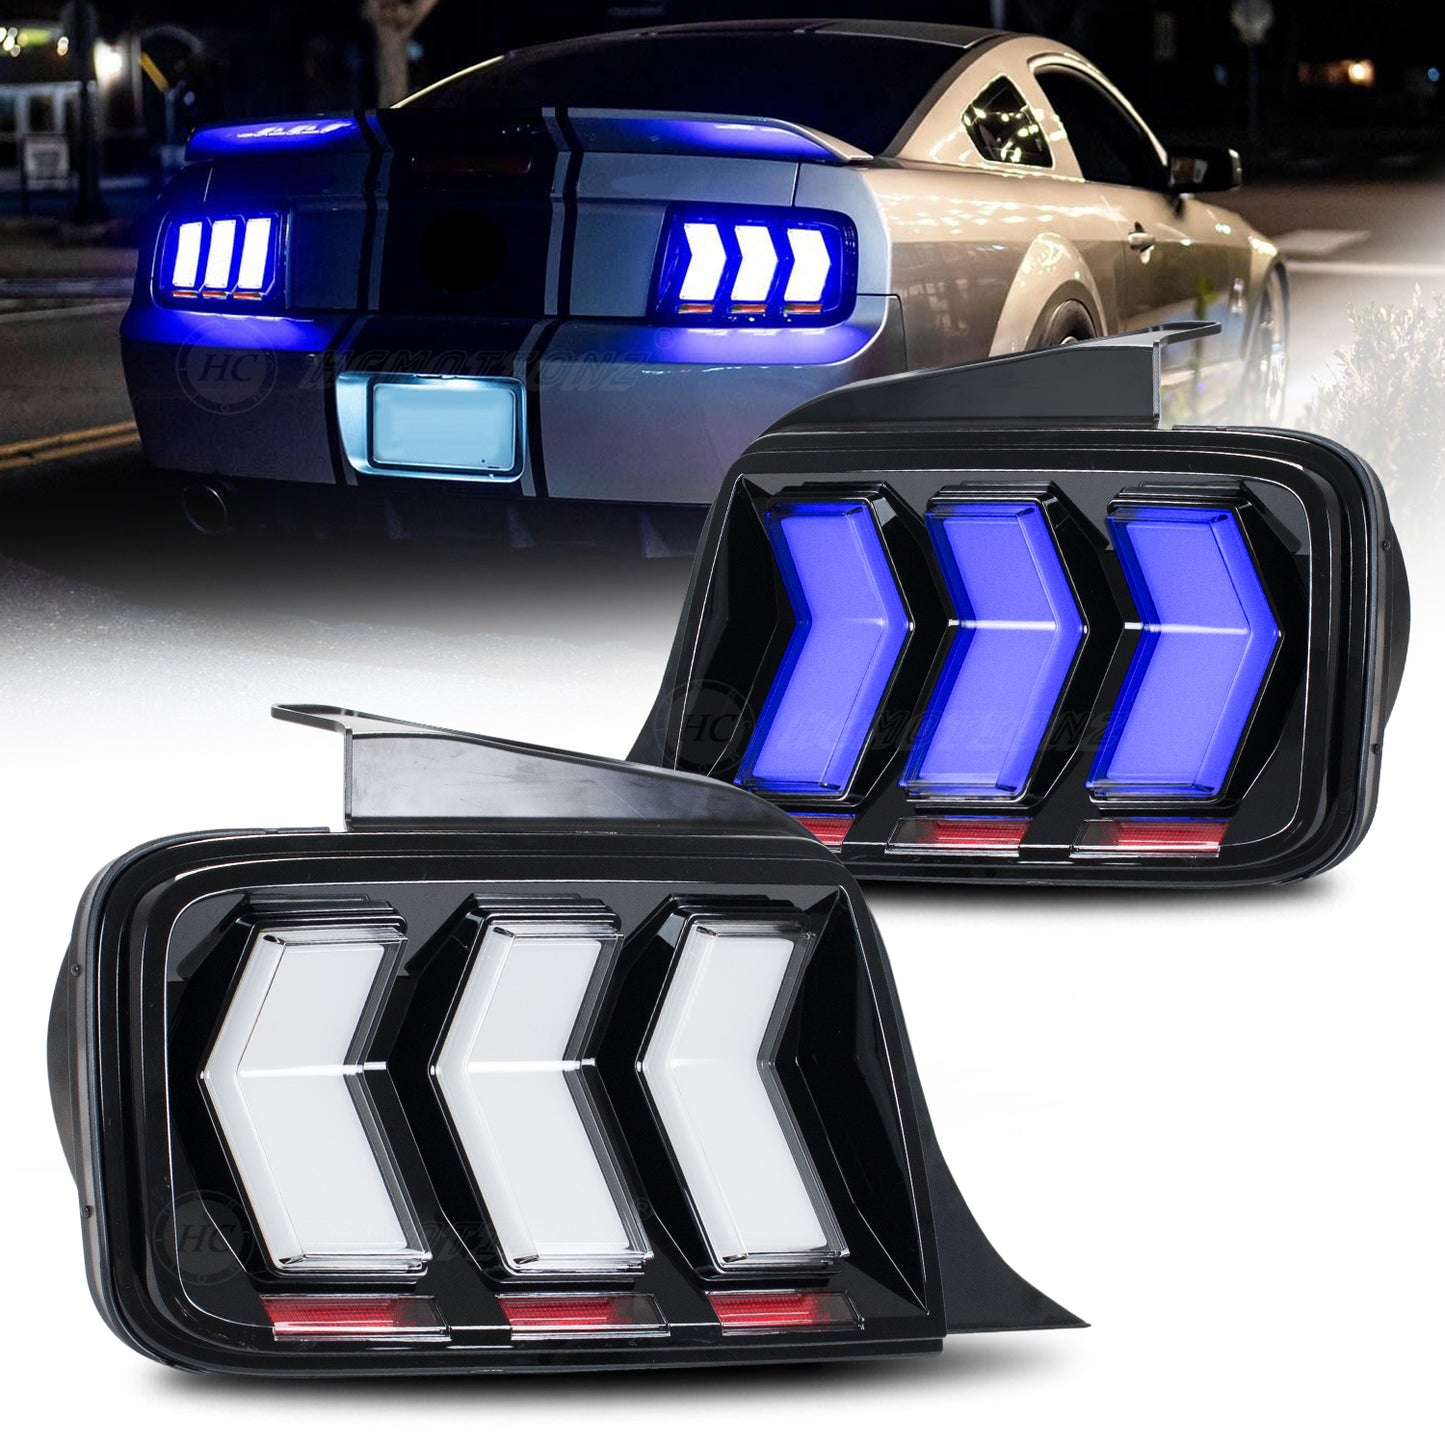 HCMOTIONZ LED RGB Tail lights For Ford Mustang 2005-2009 High Quality Start UP Animation